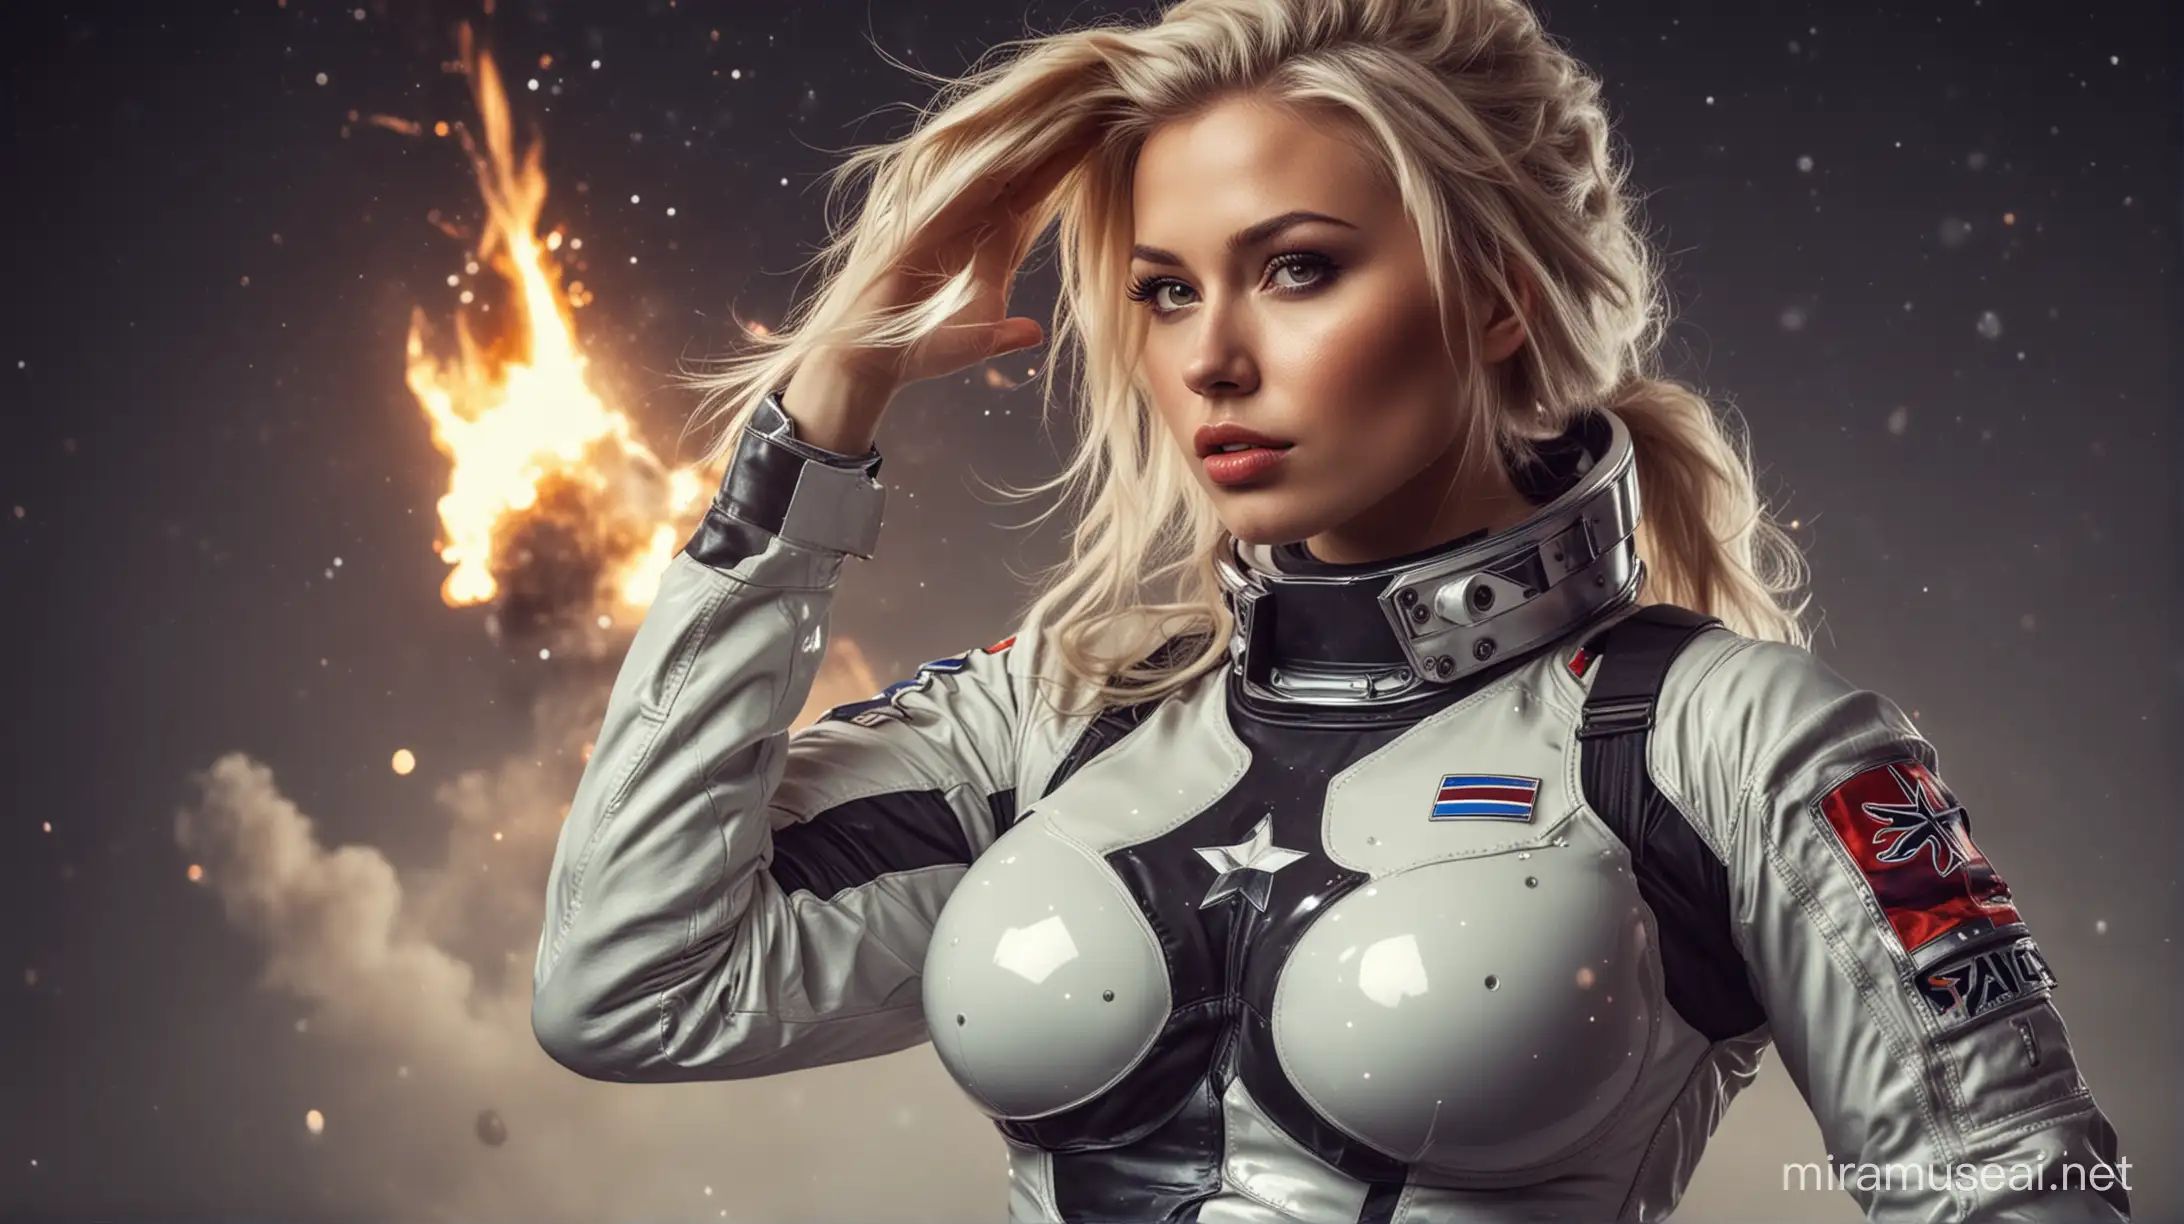 Sexy Norwegian Girl Saluting in Armored Spacesuit Amidst Glowing Galaxies